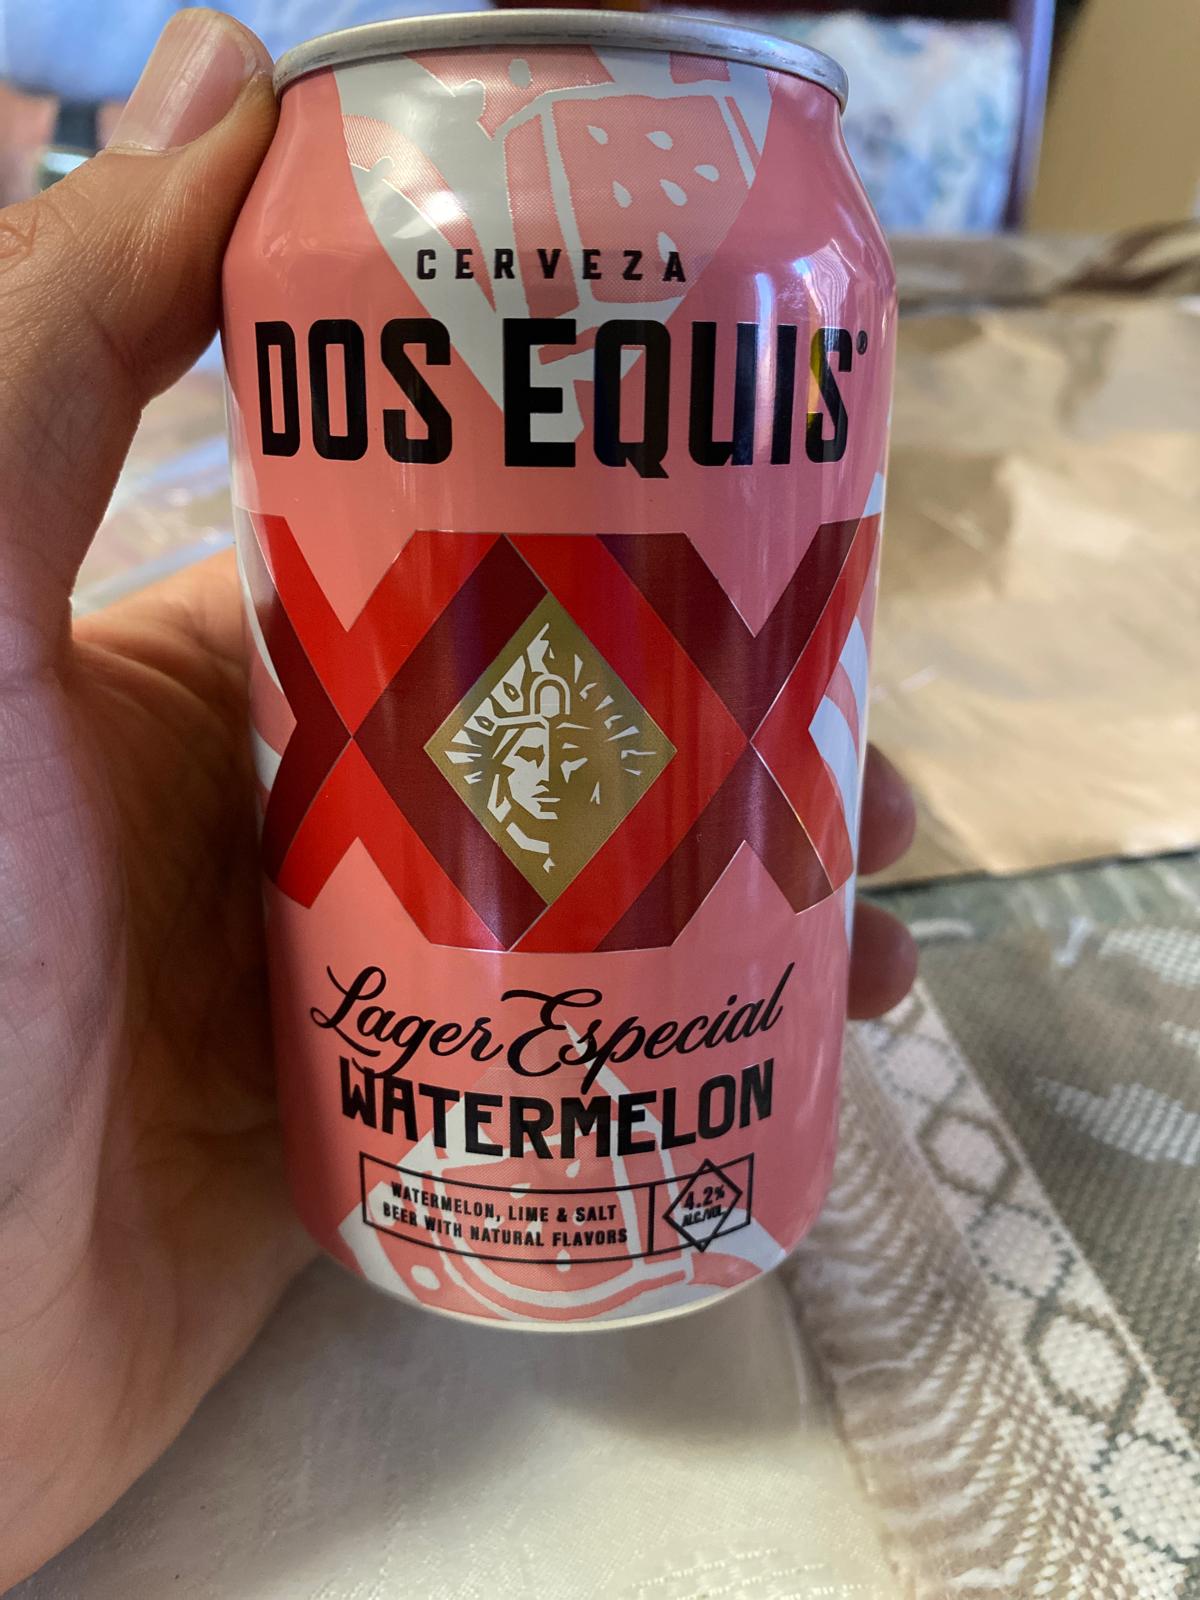 Dos Equis Lager Especial Watermelon